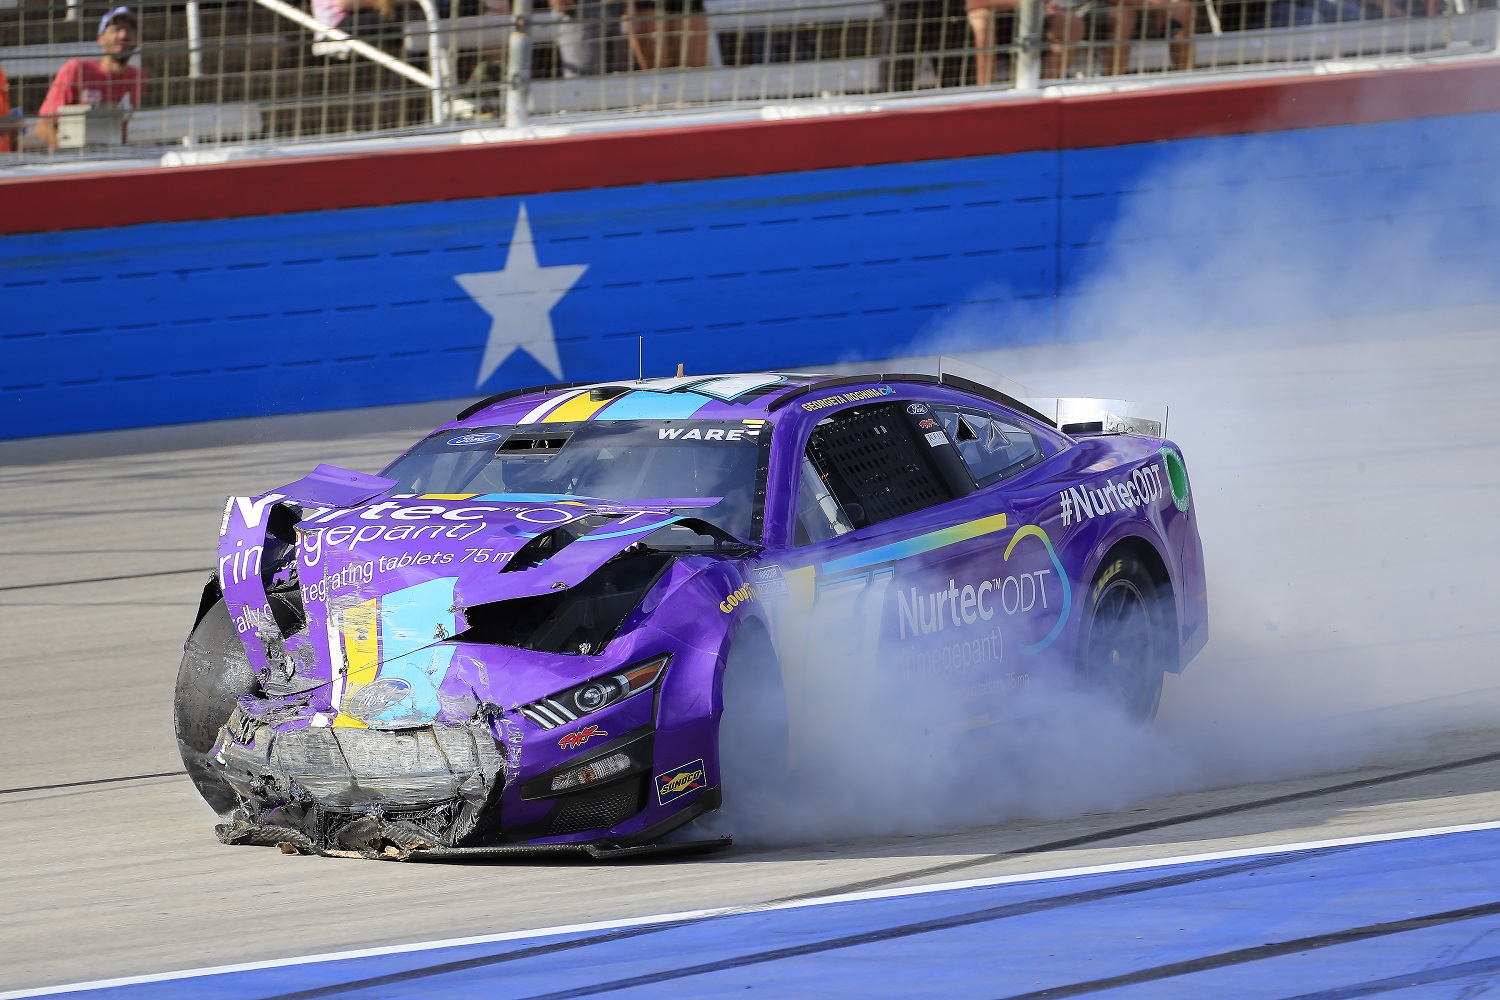 Cody Ware after a big impact in Turn 4 during the NASCAR Cup Series Autotrader EchoPark Automotive 500 on Sept. 25, 2022 at the Texas Motor Speedway in Fort Worth, Texas.